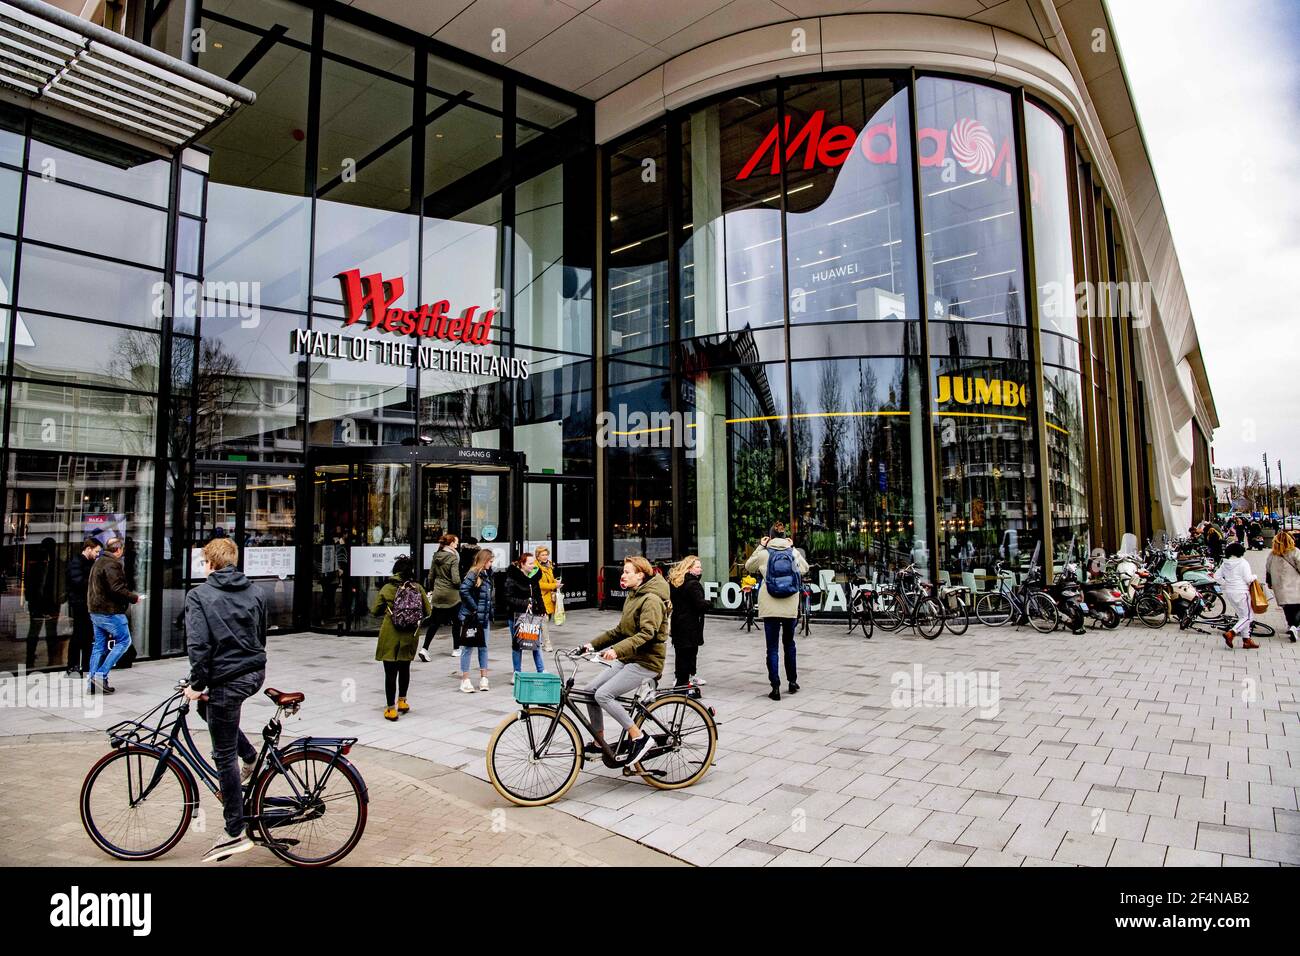 Westfield Mall of the Netherlands has opened, a unique, fully covered  shopping and experience mall of 117,000m² with a four-star service level.  The shopping center has officially opened, but a grand festive